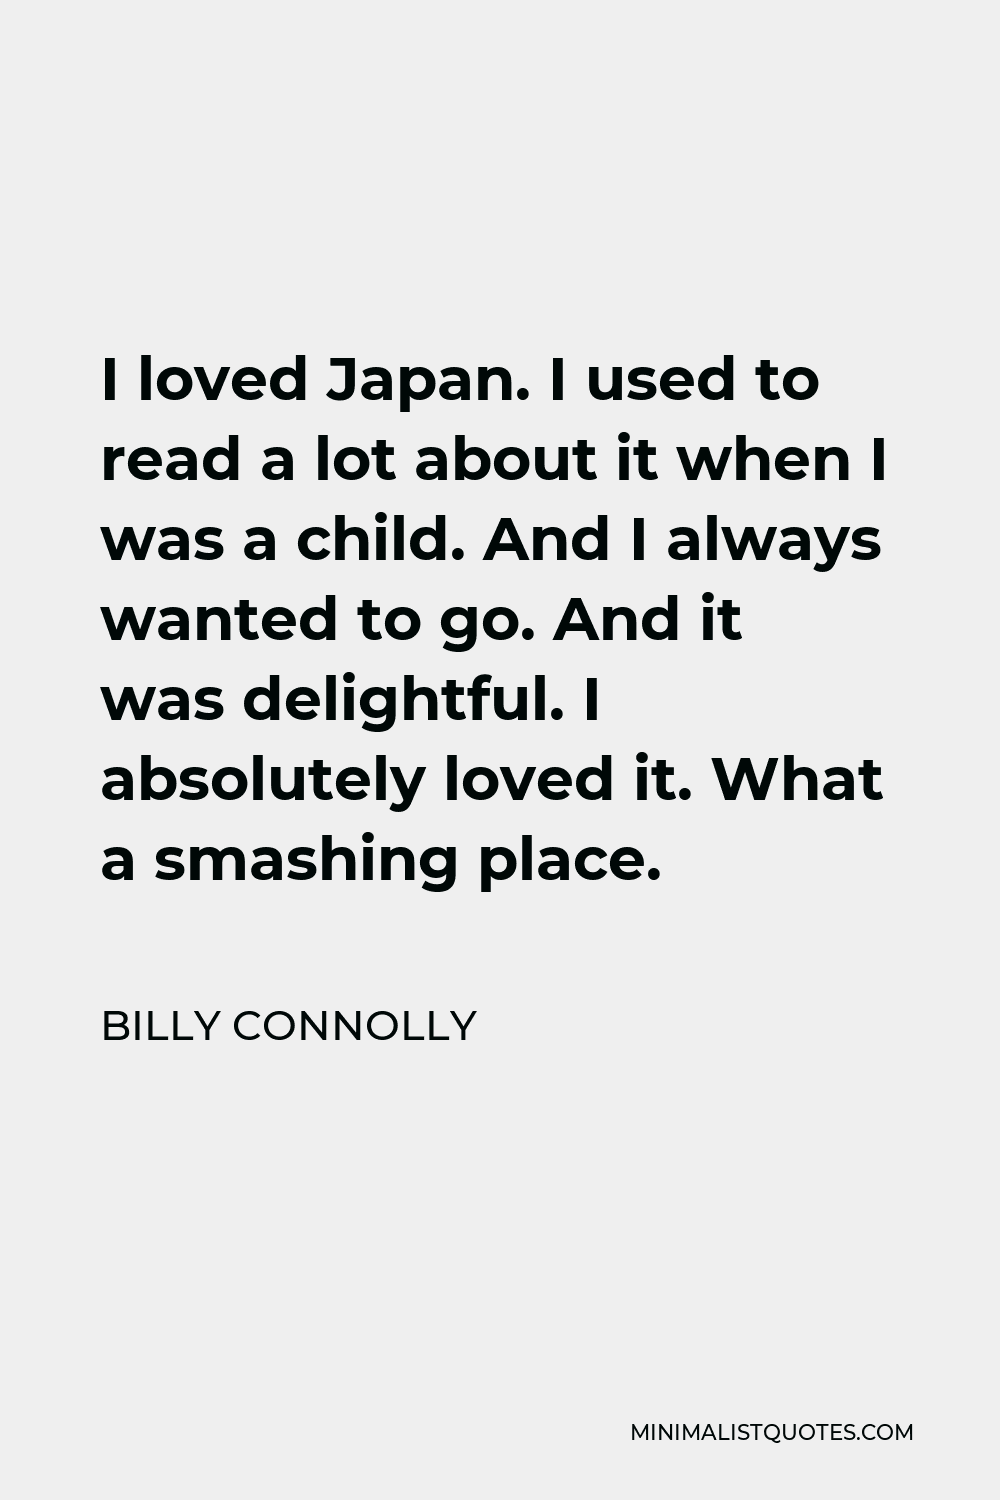 Billy Connolly Quote - I loved Japan. I used to read a lot about it when I was a child. And I always wanted to go. And it was delightful. I absolutely loved it. What a smashing place.